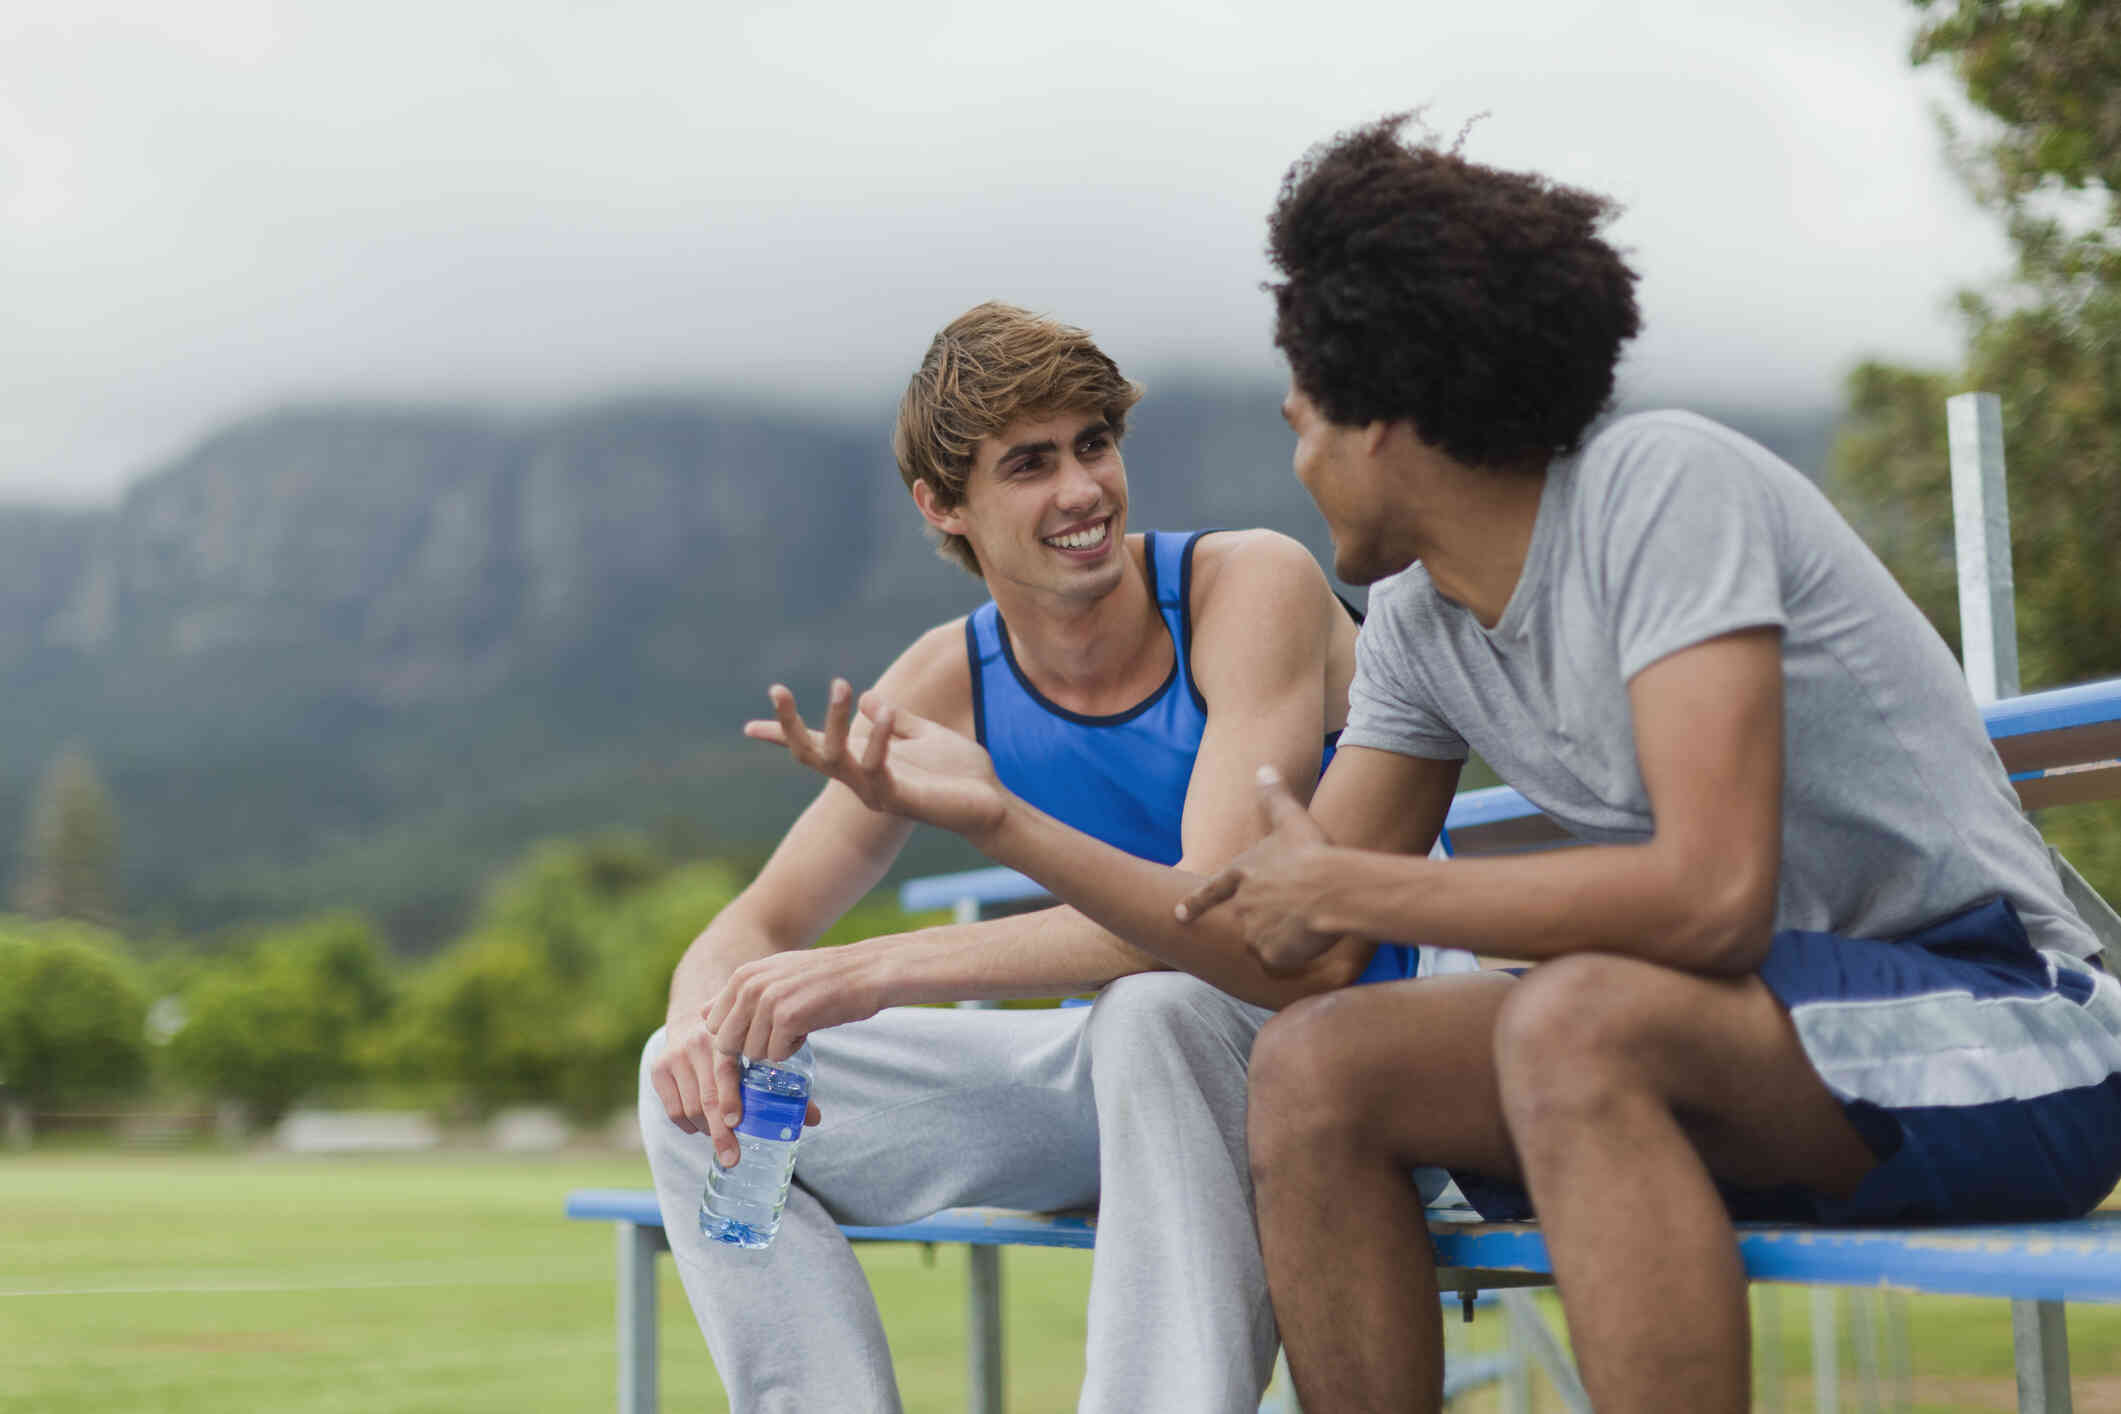 Two men in workout clothes sit side by side on outdoor bleachers while talking and smiling.